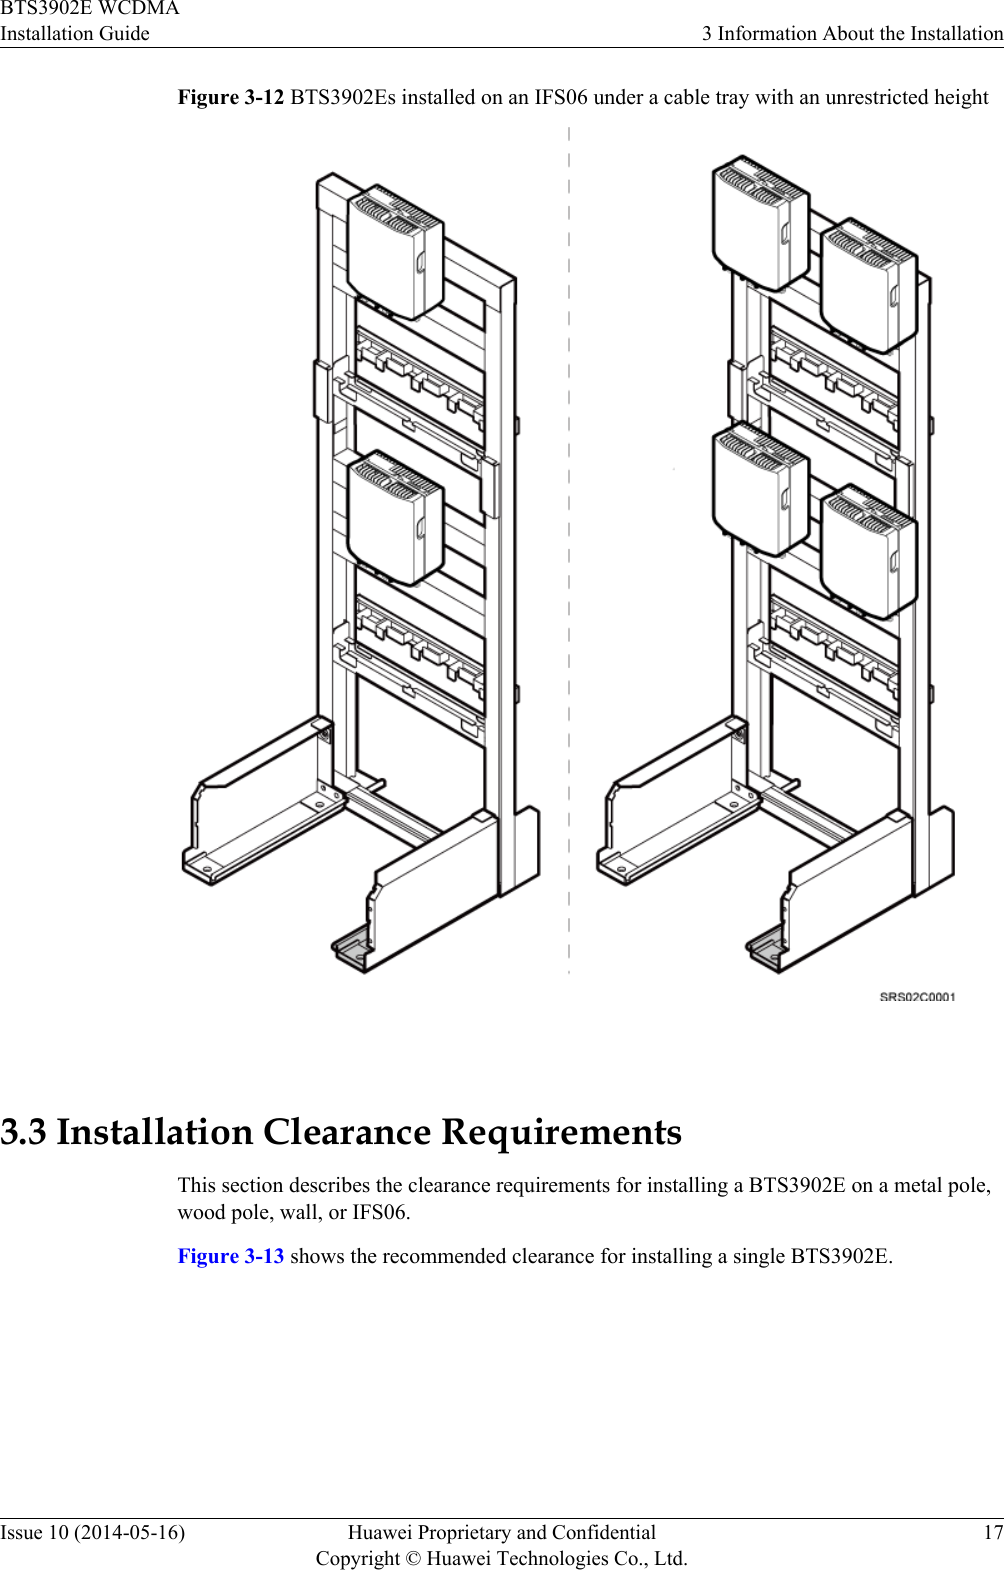 Figure 3-12 BTS3902Es installed on an IFS06 under a cable tray with an unrestricted height 3.3 Installation Clearance RequirementsThis section describes the clearance requirements for installing a BTS3902E on a metal pole,wood pole, wall, or IFS06.Figure 3-13 shows the recommended clearance for installing a single BTS3902E.BTS3902E WCDMAInstallation Guide 3 Information About the InstallationIssue 10 (2014-05-16) Huawei Proprietary and ConfidentialCopyright © Huawei Technologies Co., Ltd.17